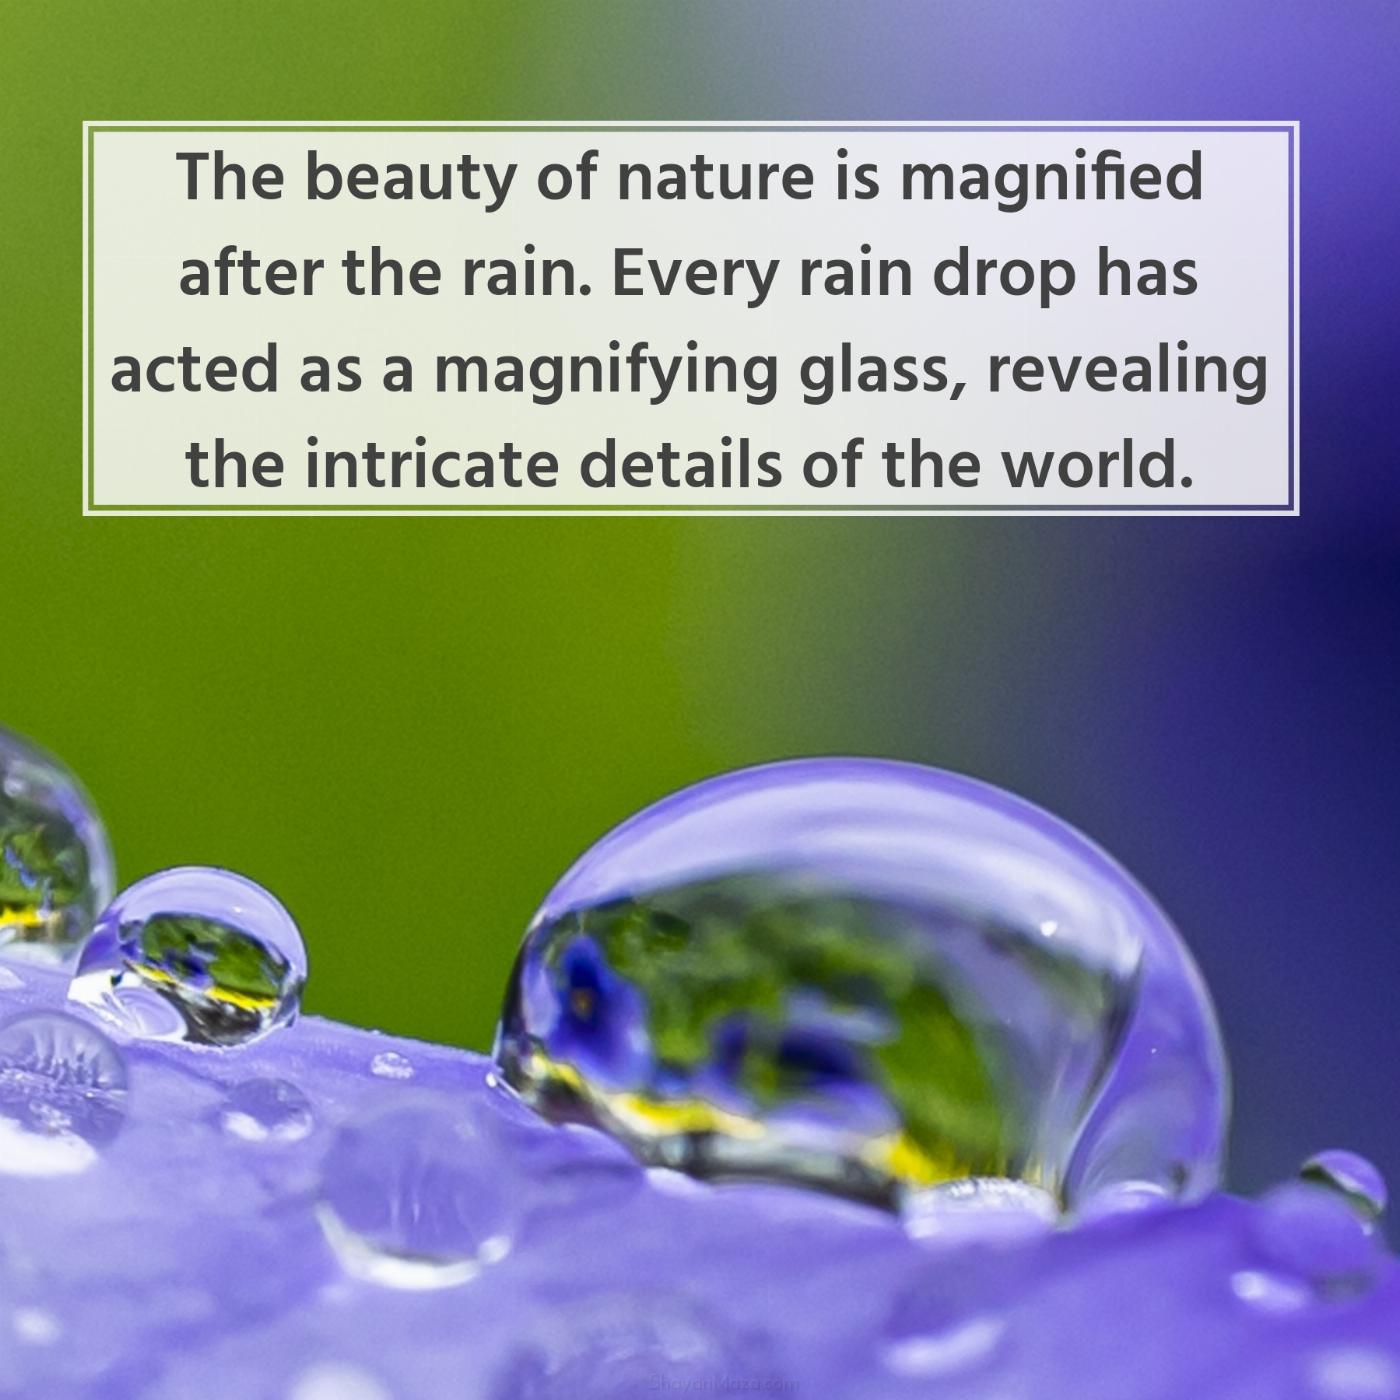 The beauty of nature is magnified after the rain